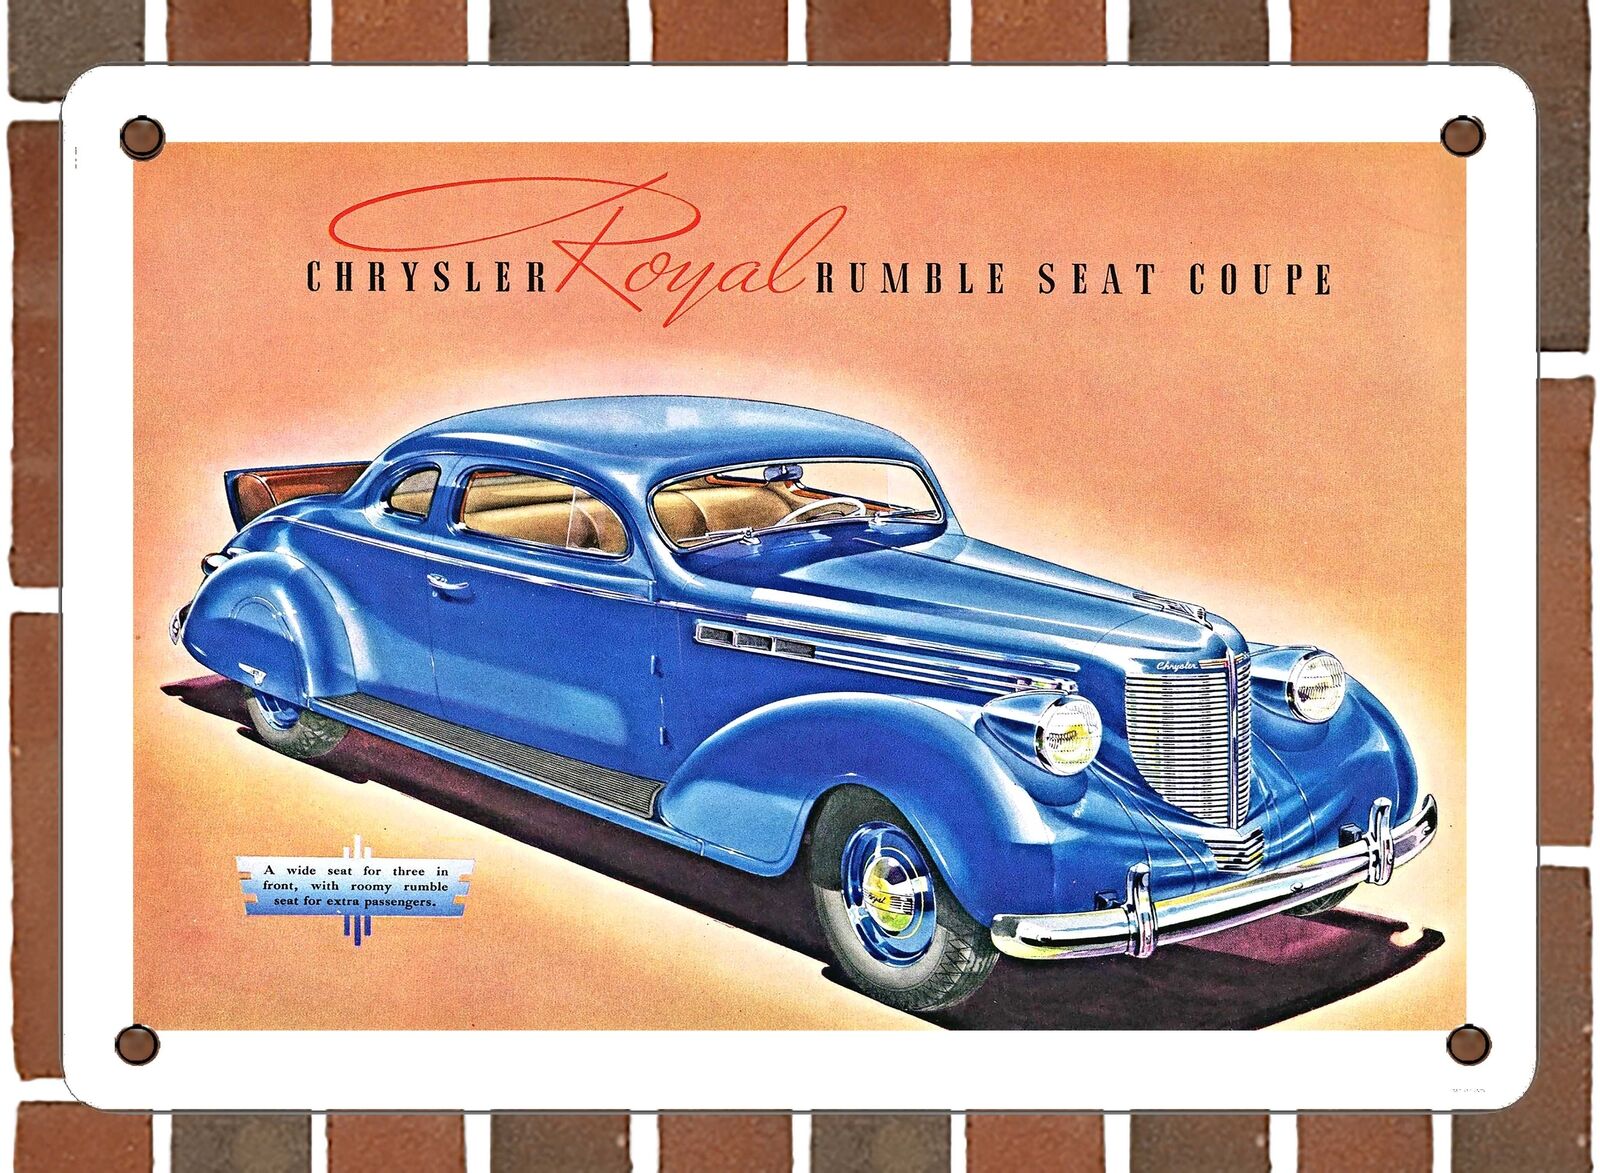 METAL SIGN - 1938 Chrysler Royal Rumble Seat Coupe - 10x14 Inches